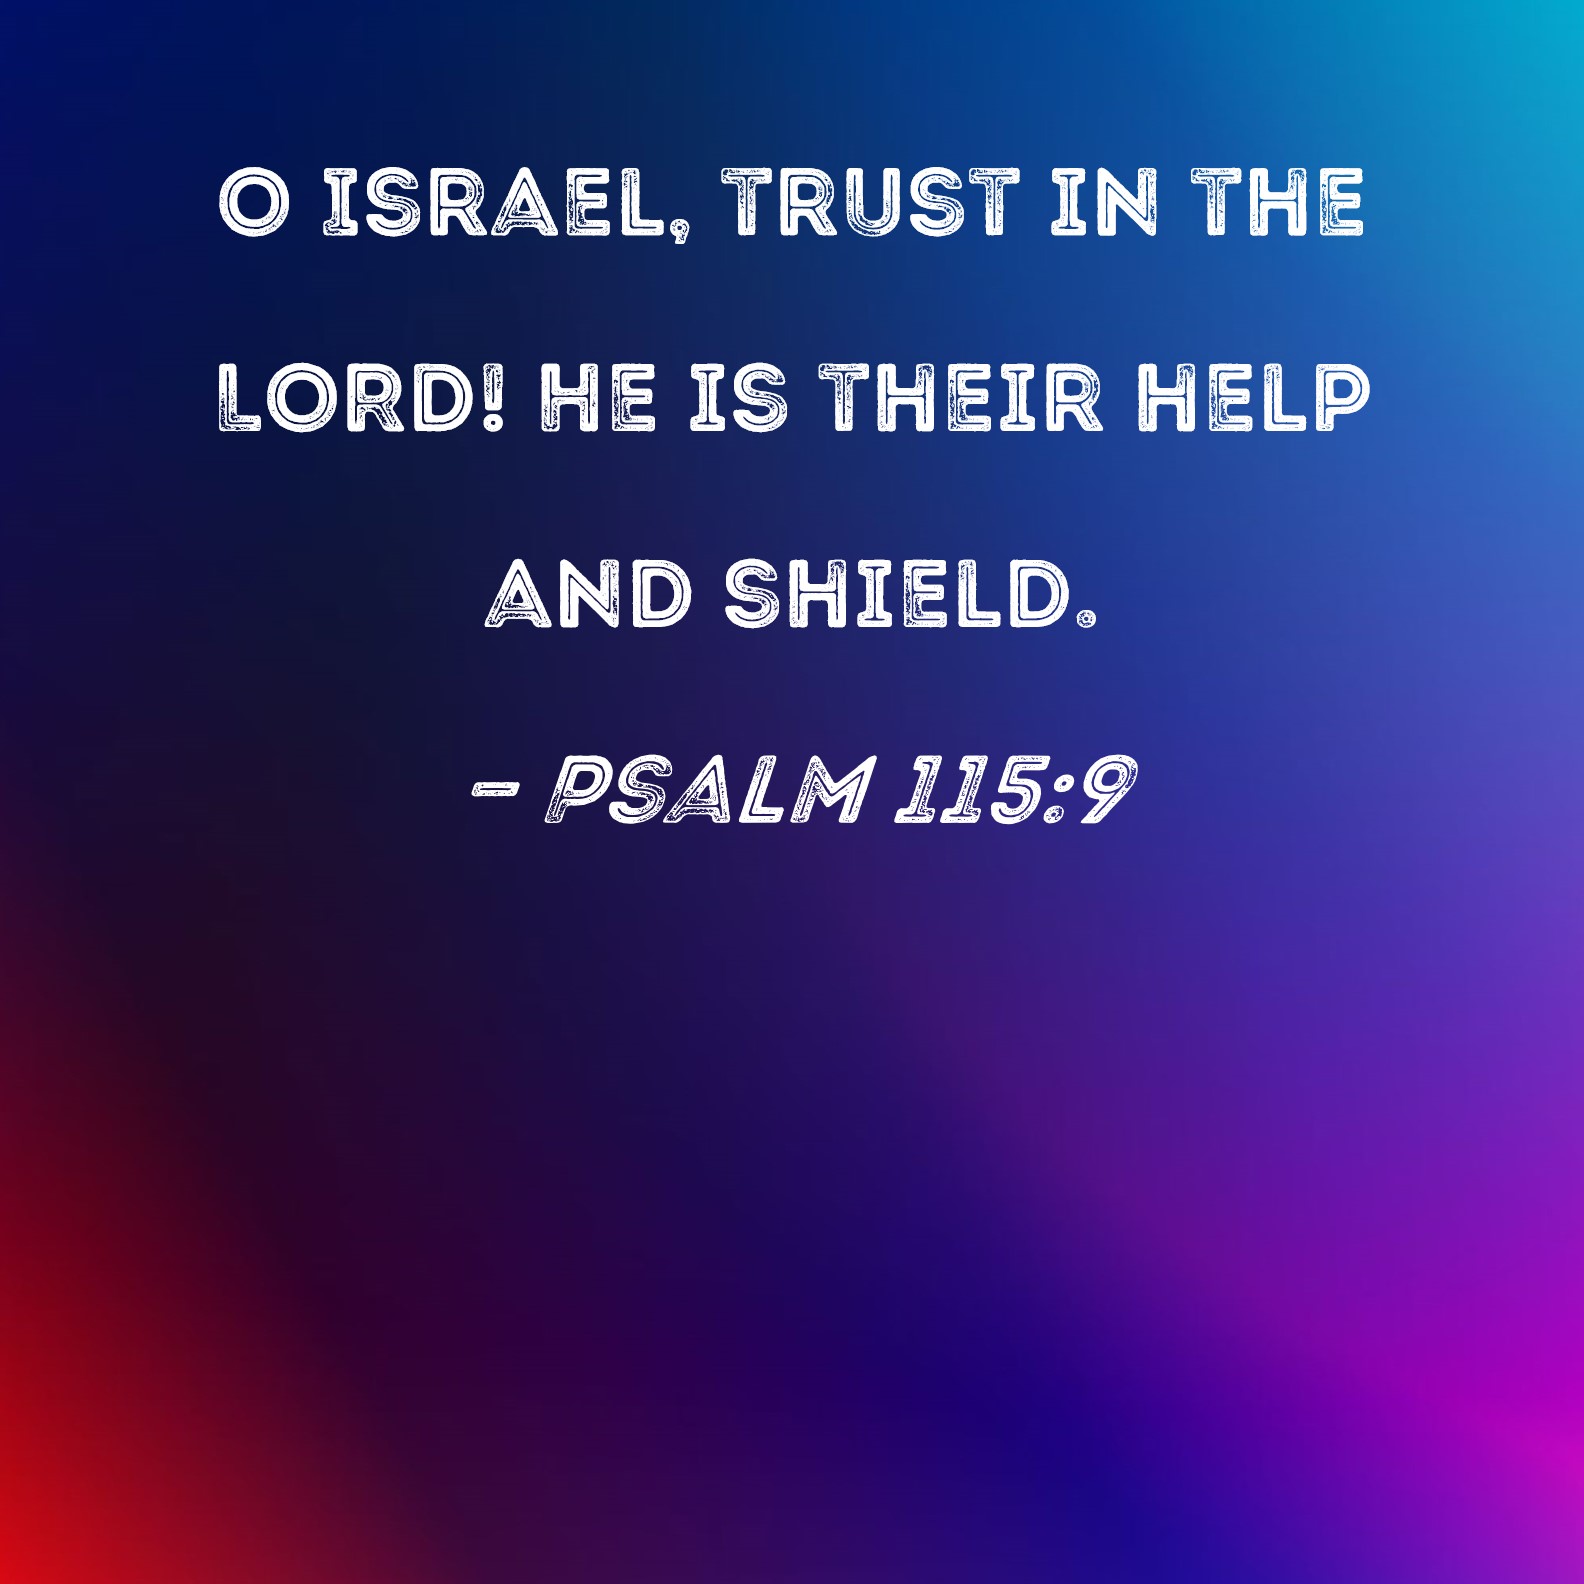 Psalm 115:9 O Israel, trust in the LORD! He is their help and shield.